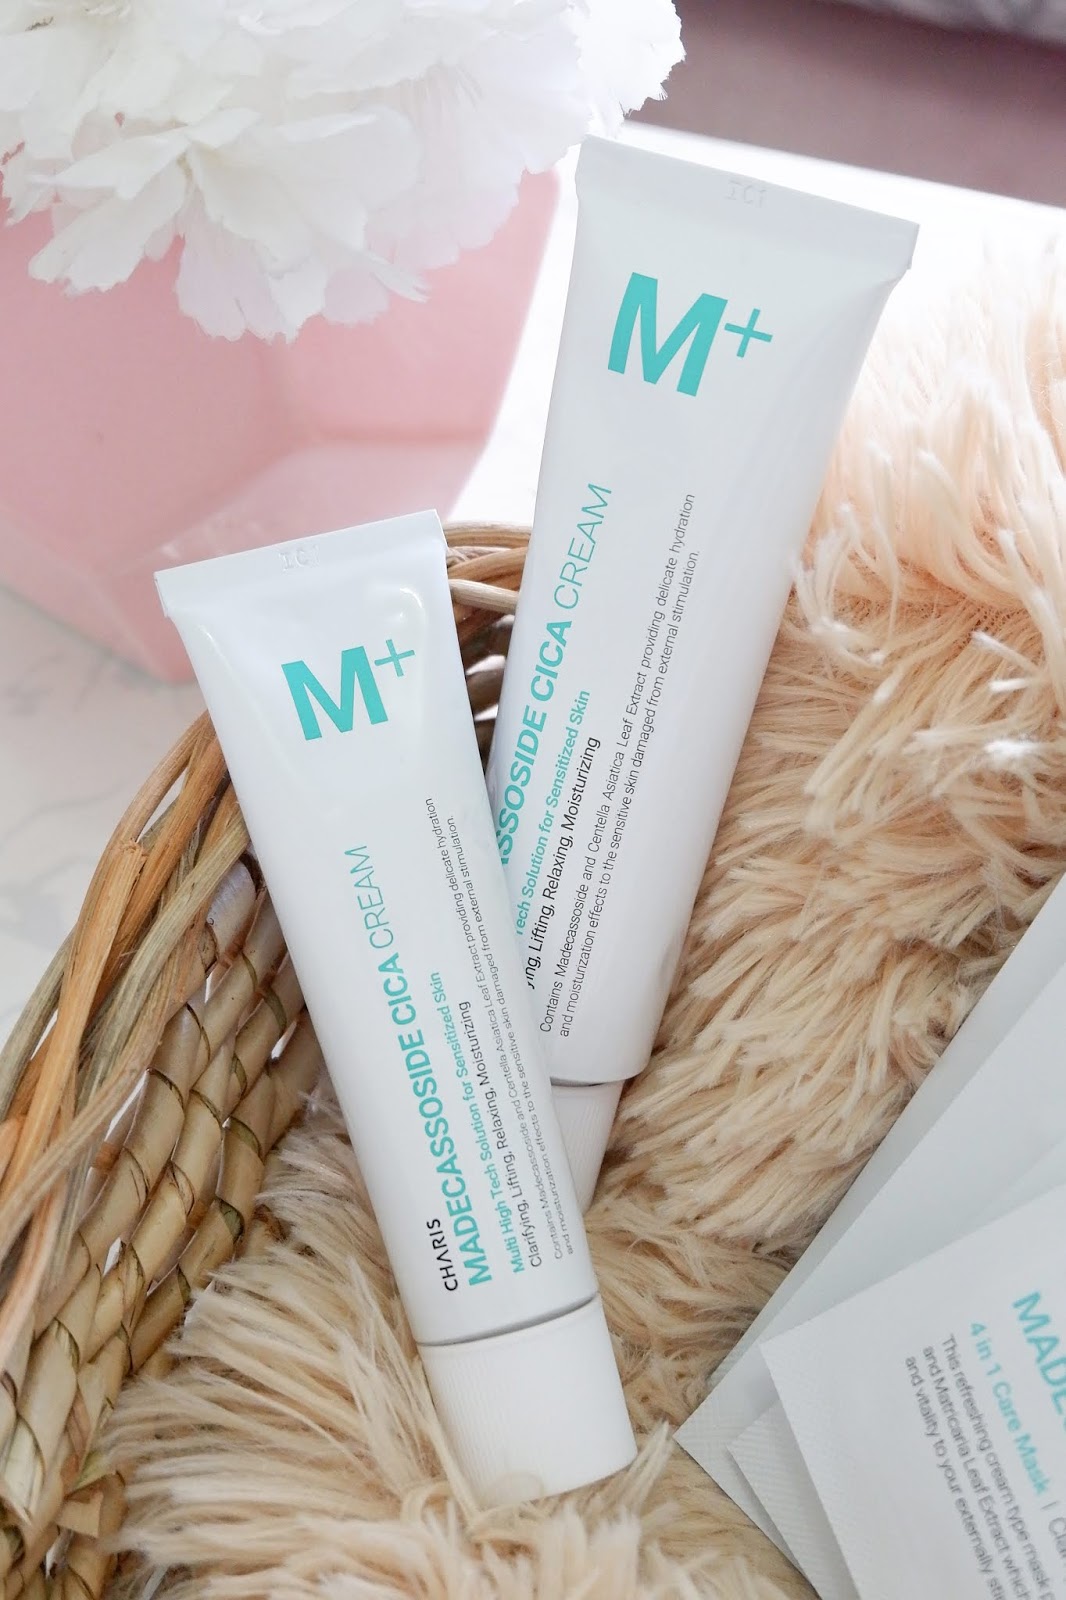 CHARIS: M+ MADECASSOSIDE CICA CREAM AND SHEET MASK REVIEW